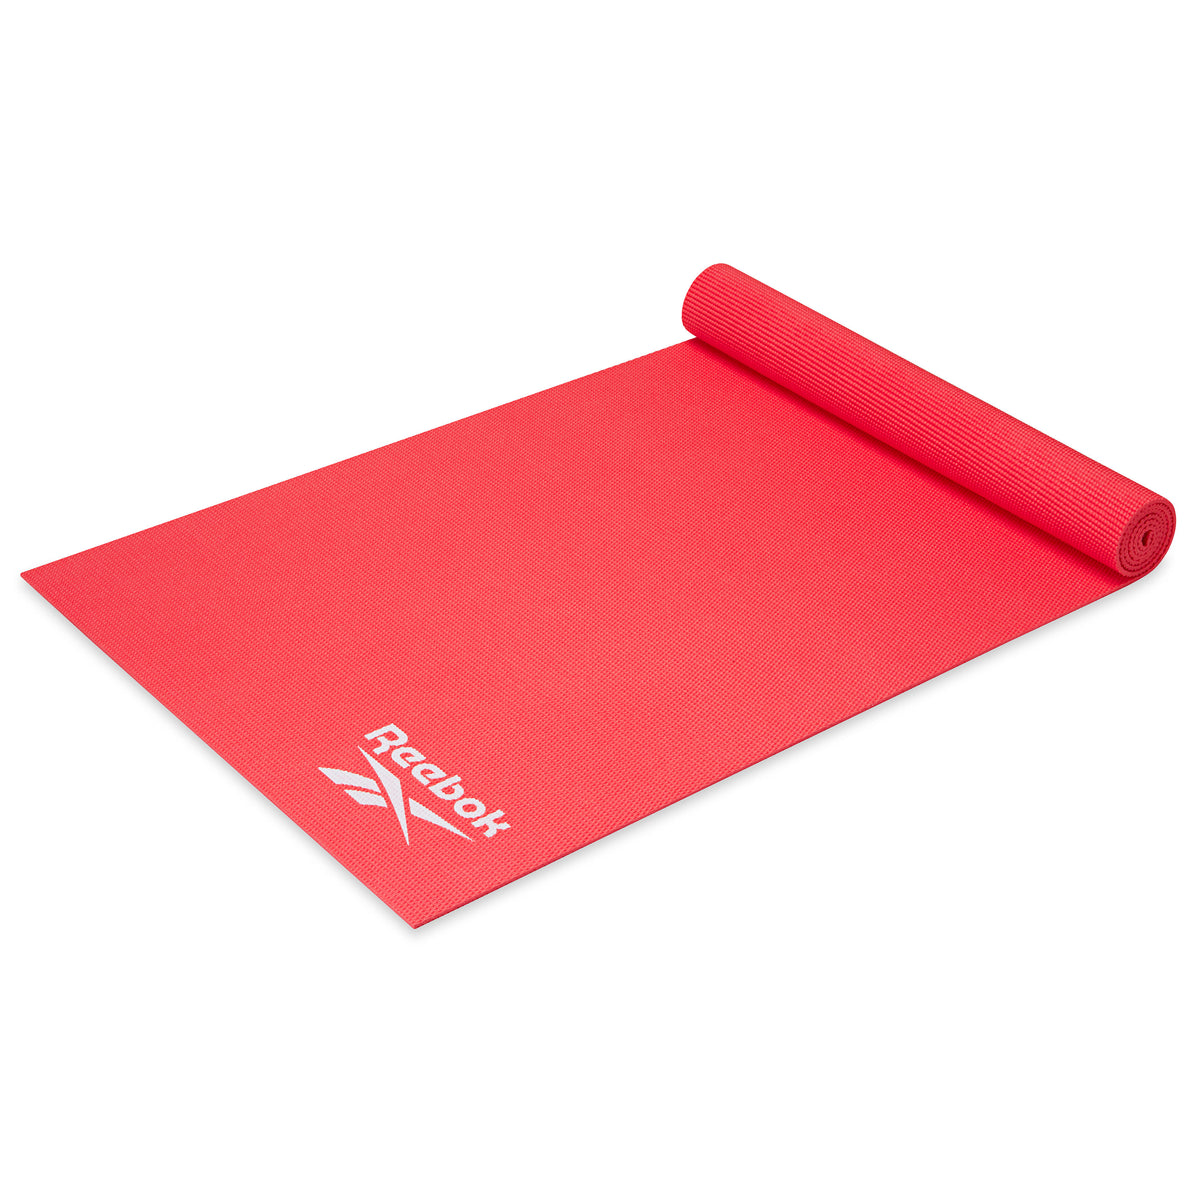 Reebok Solid Yoga Mat (5mm) Cherry top rolled angle